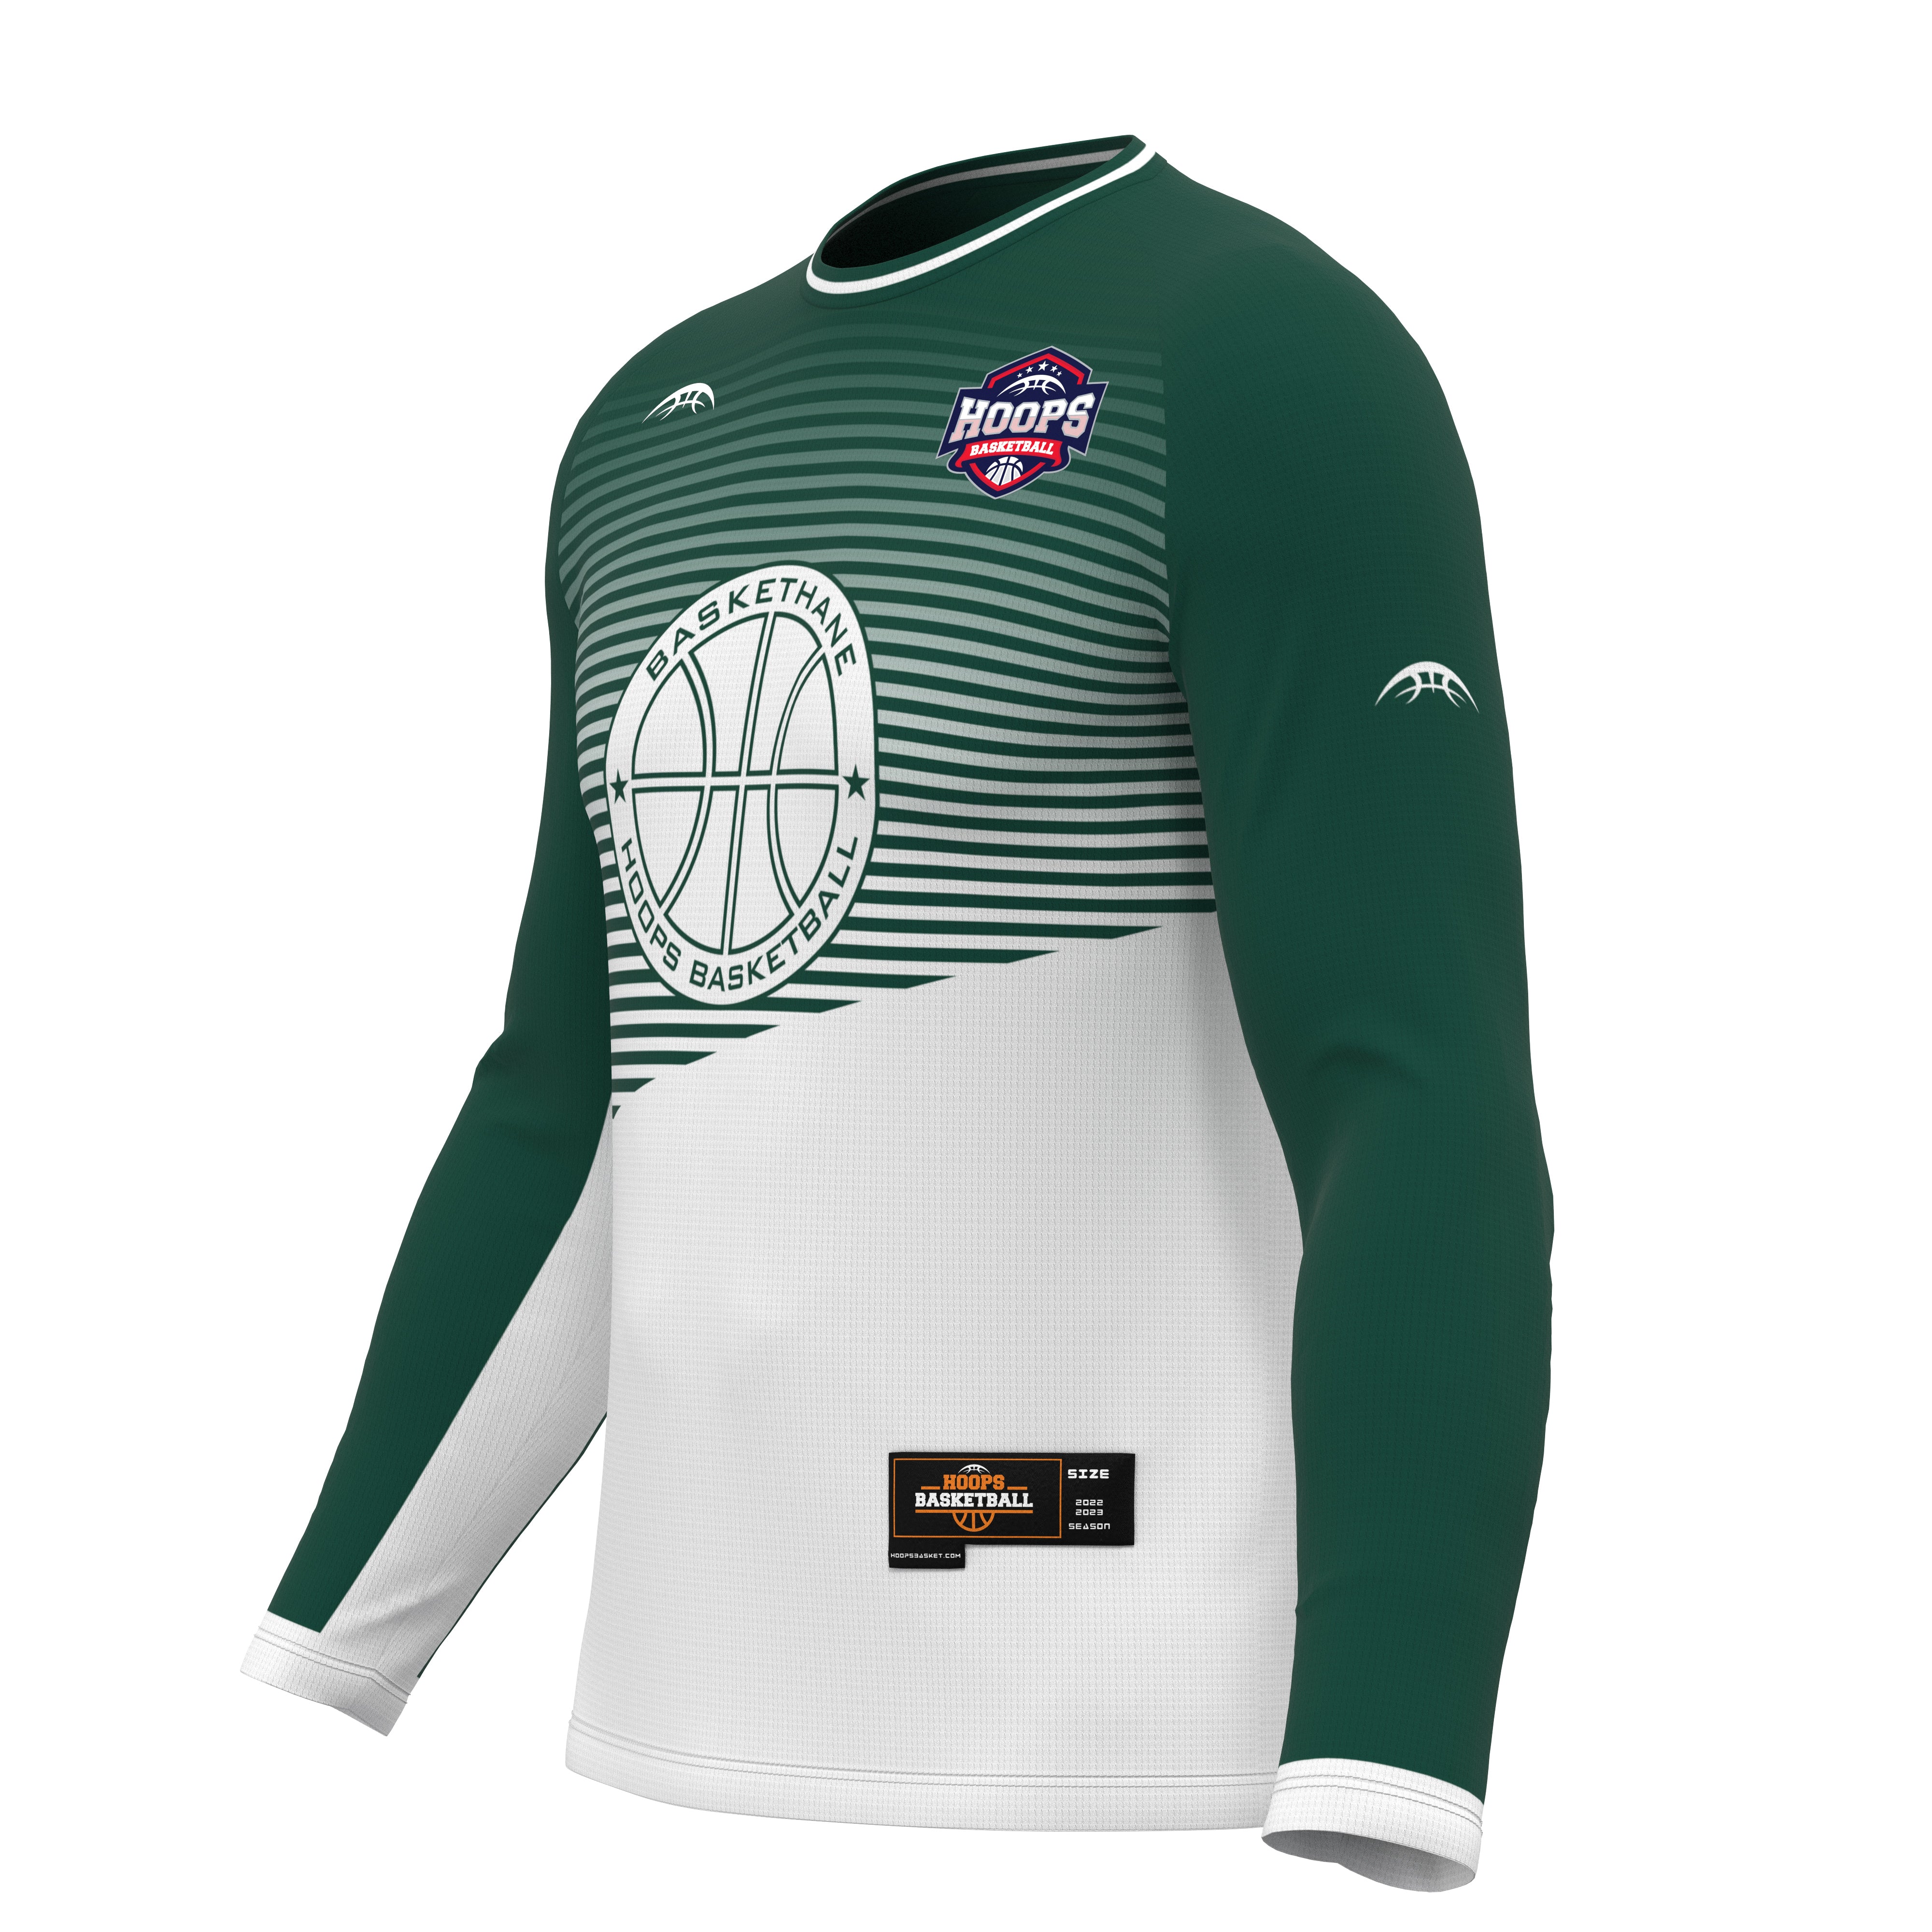 Customize your own Basketball Shooting Shirts - your design